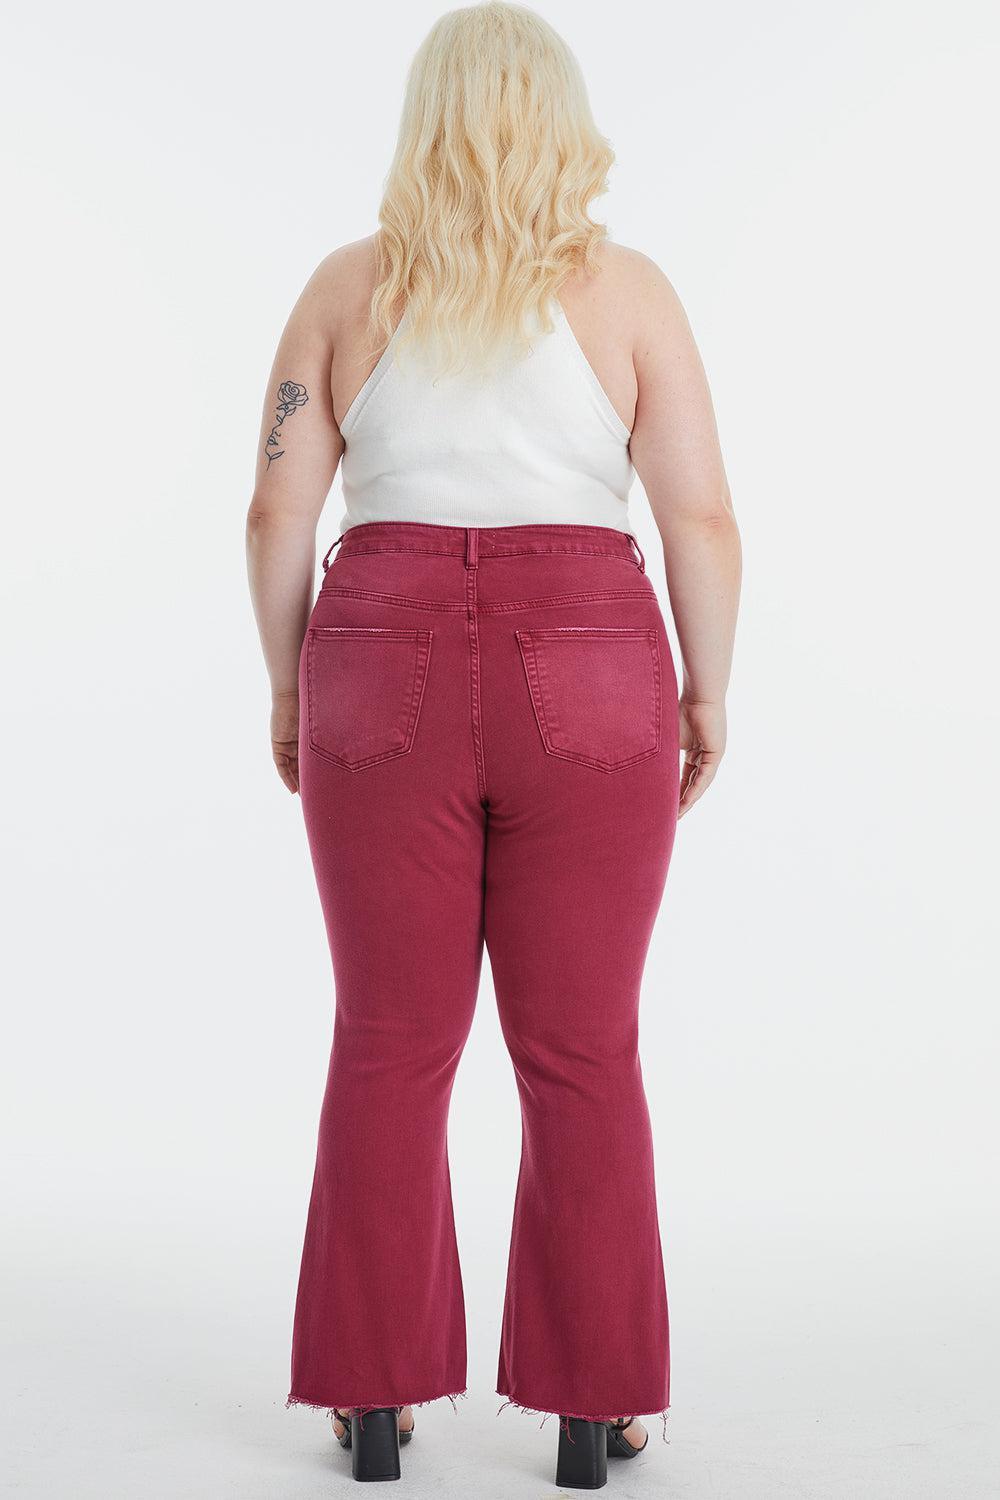 a woman in a white top and red pants